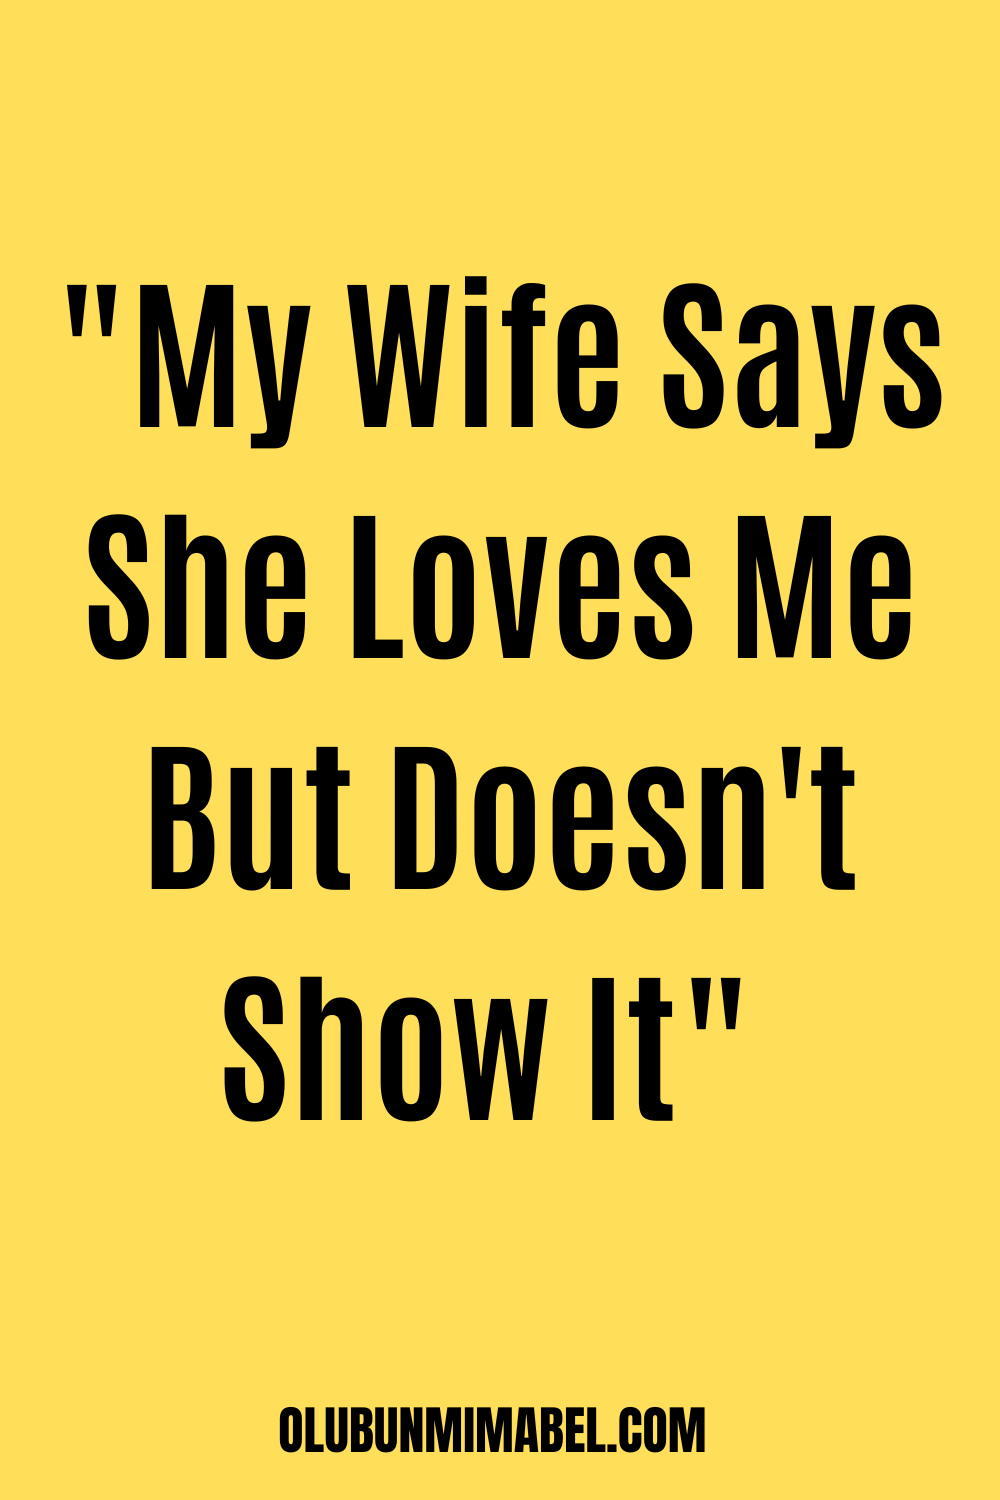 My Wife Says She Loves Me But Doesn’t Show It